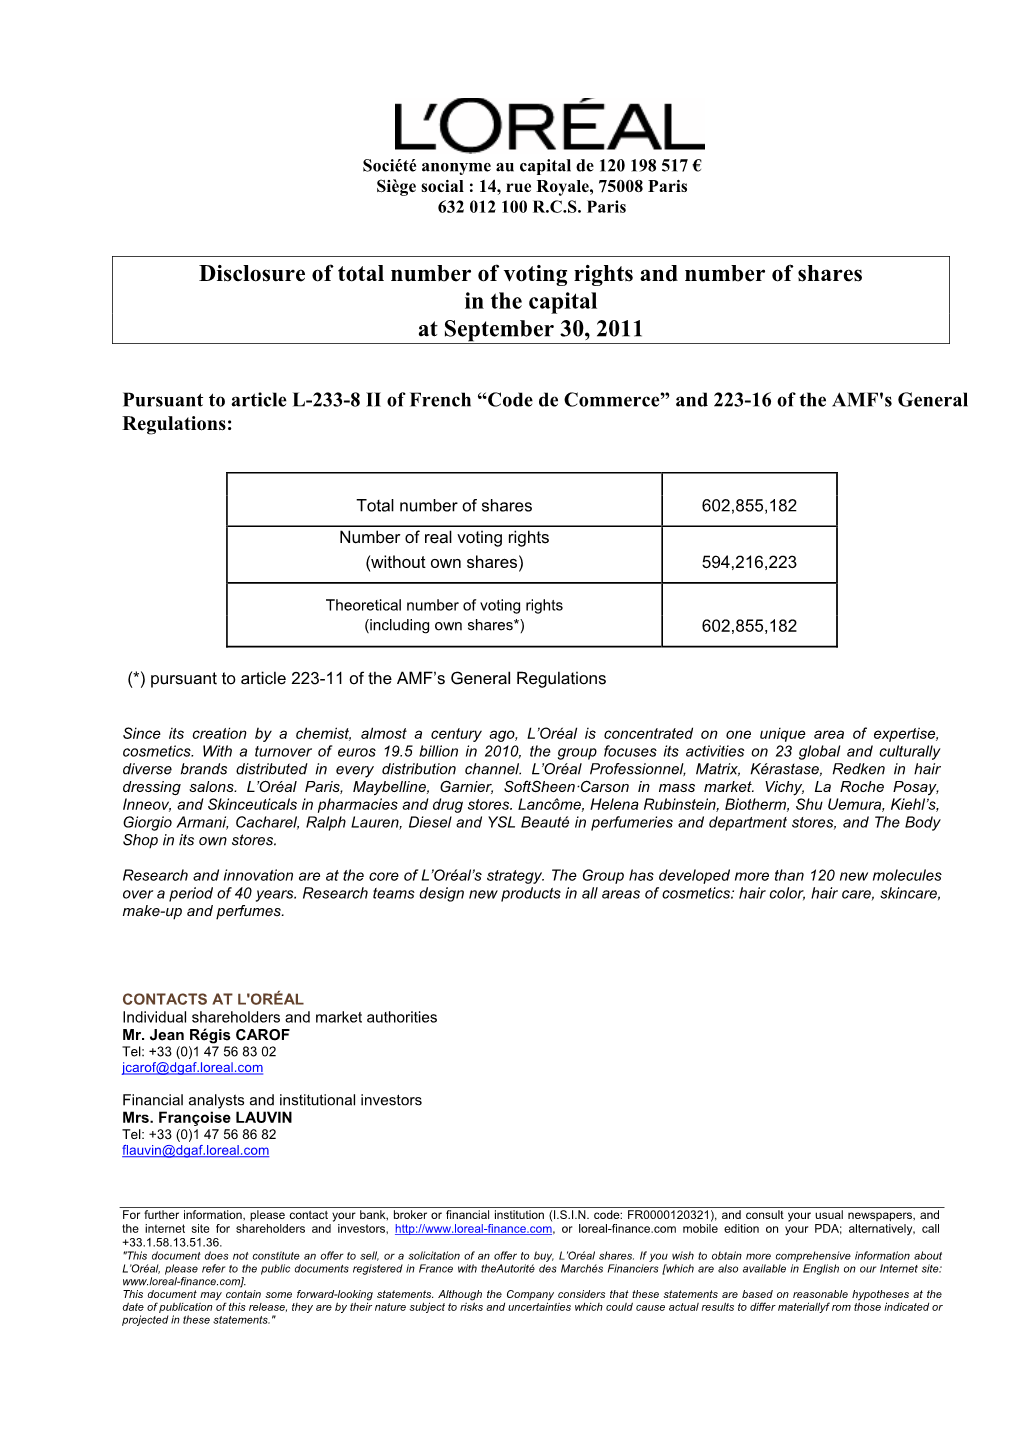 Disclosure of Total Number of Voting Rights and Number of Shares in the Capital at September 30, 2011